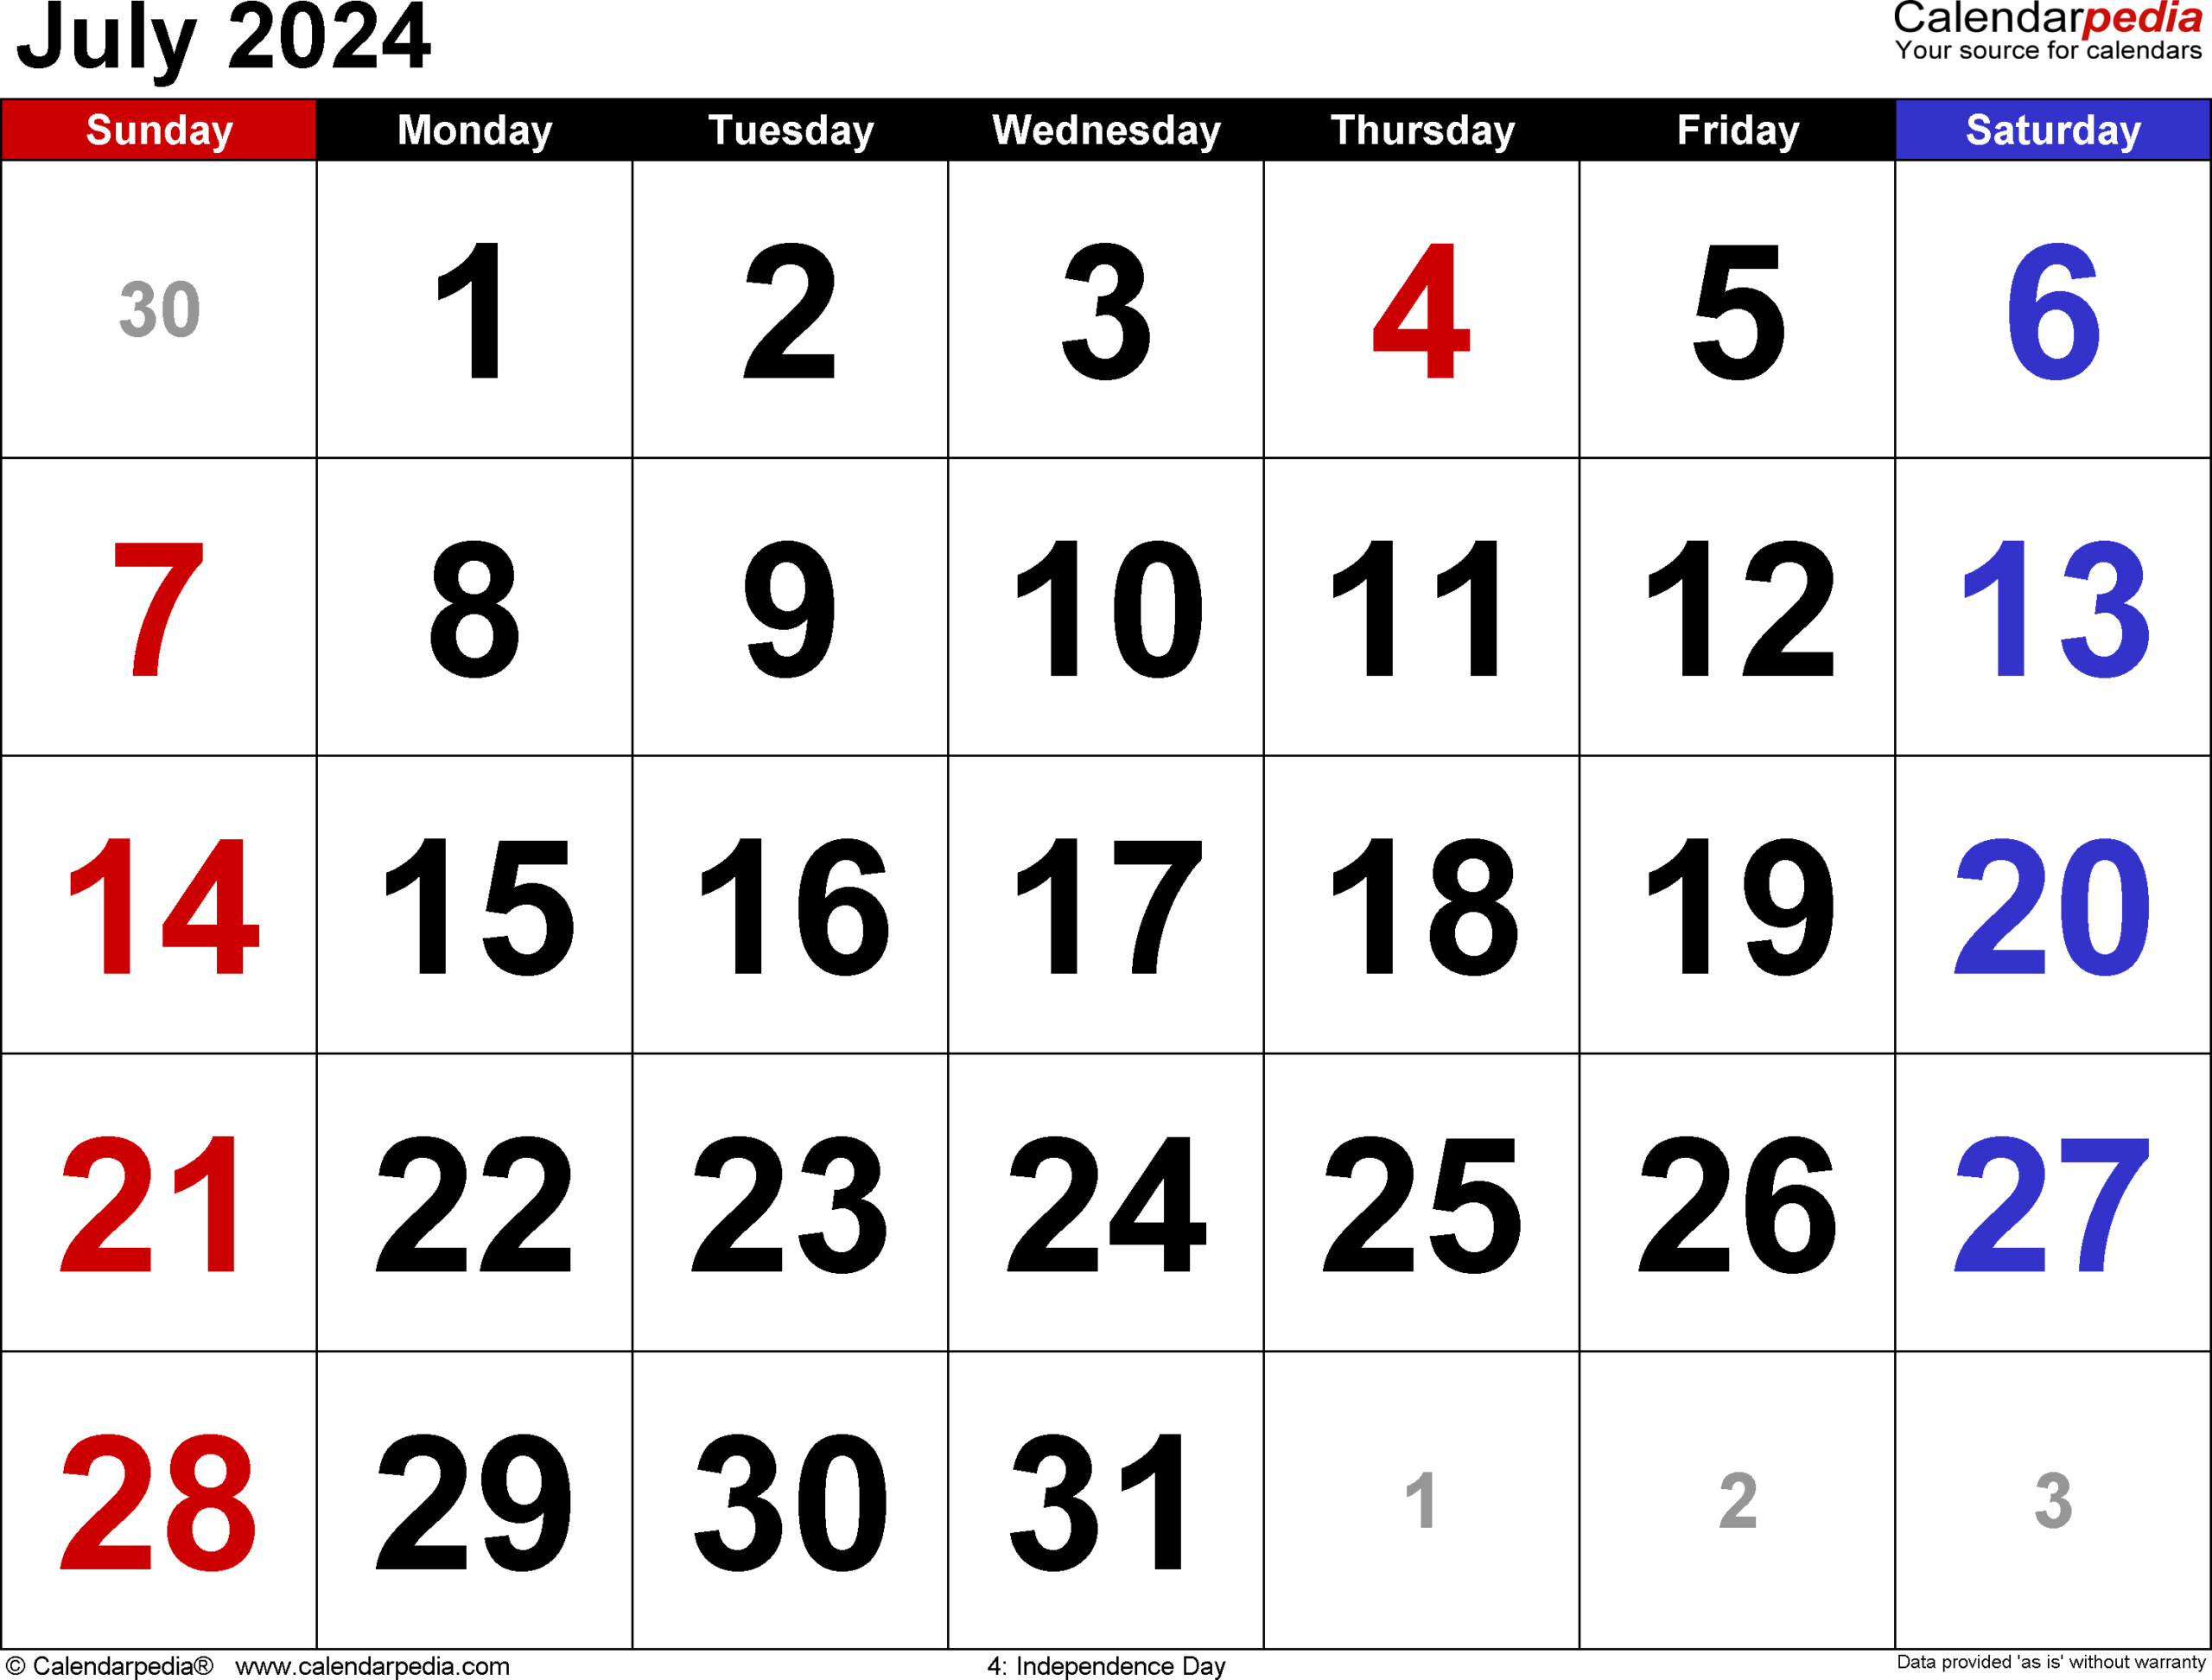 July 2024 Calendar | Templates For Word, Excel And Pdf | Calendar Days July 2024